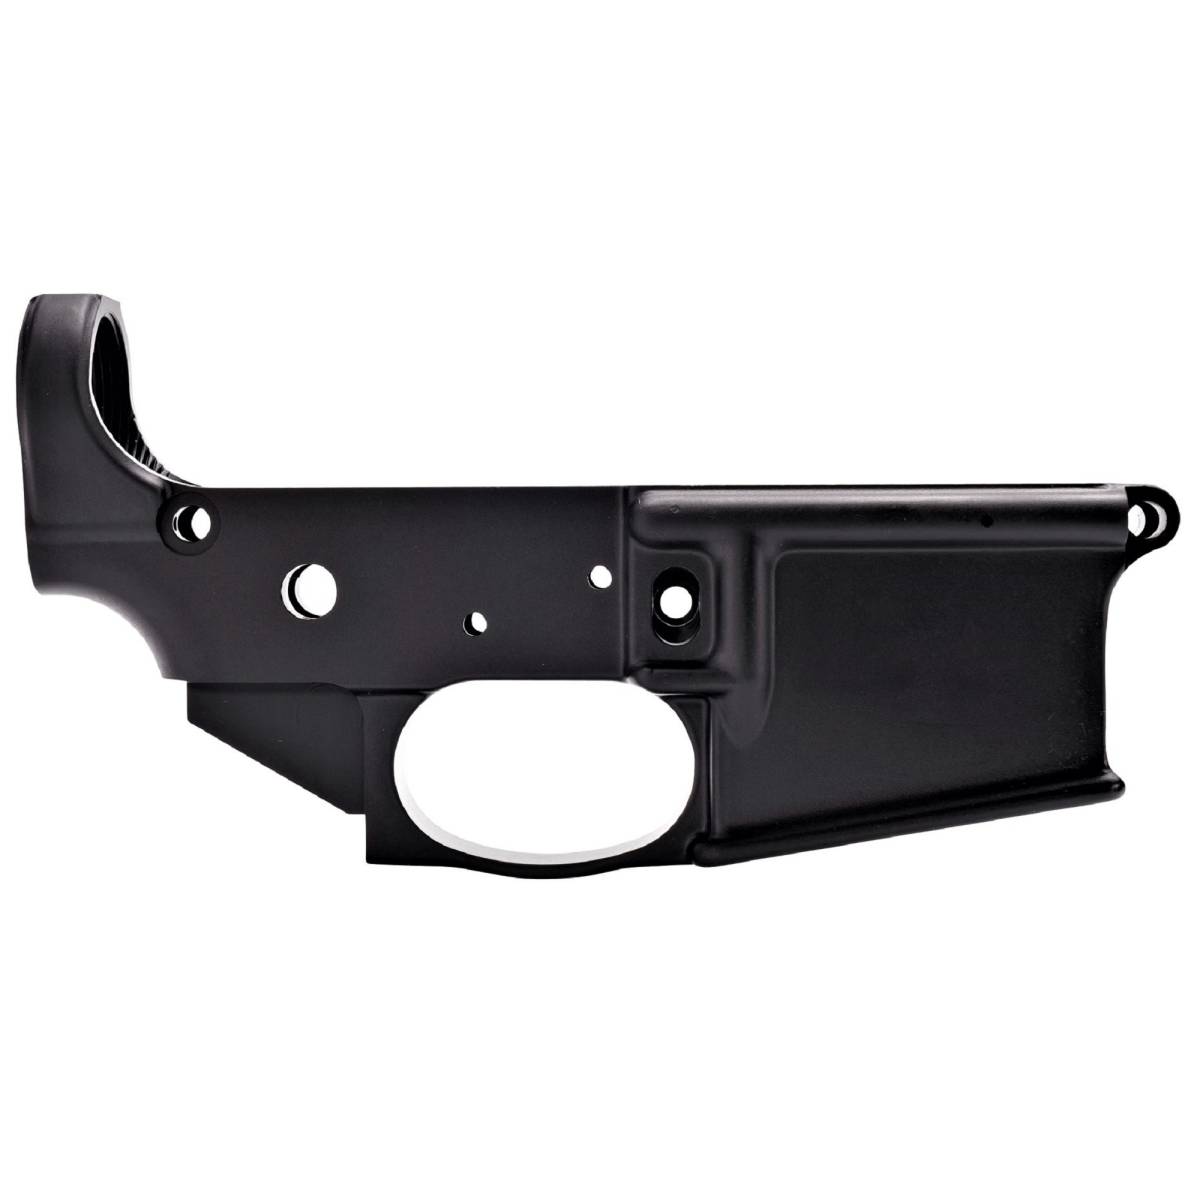 ANDERSON AM-15 STRIPPED LOWER RECEIVER AR15 CLOSED 5.56 223 AM-img-1